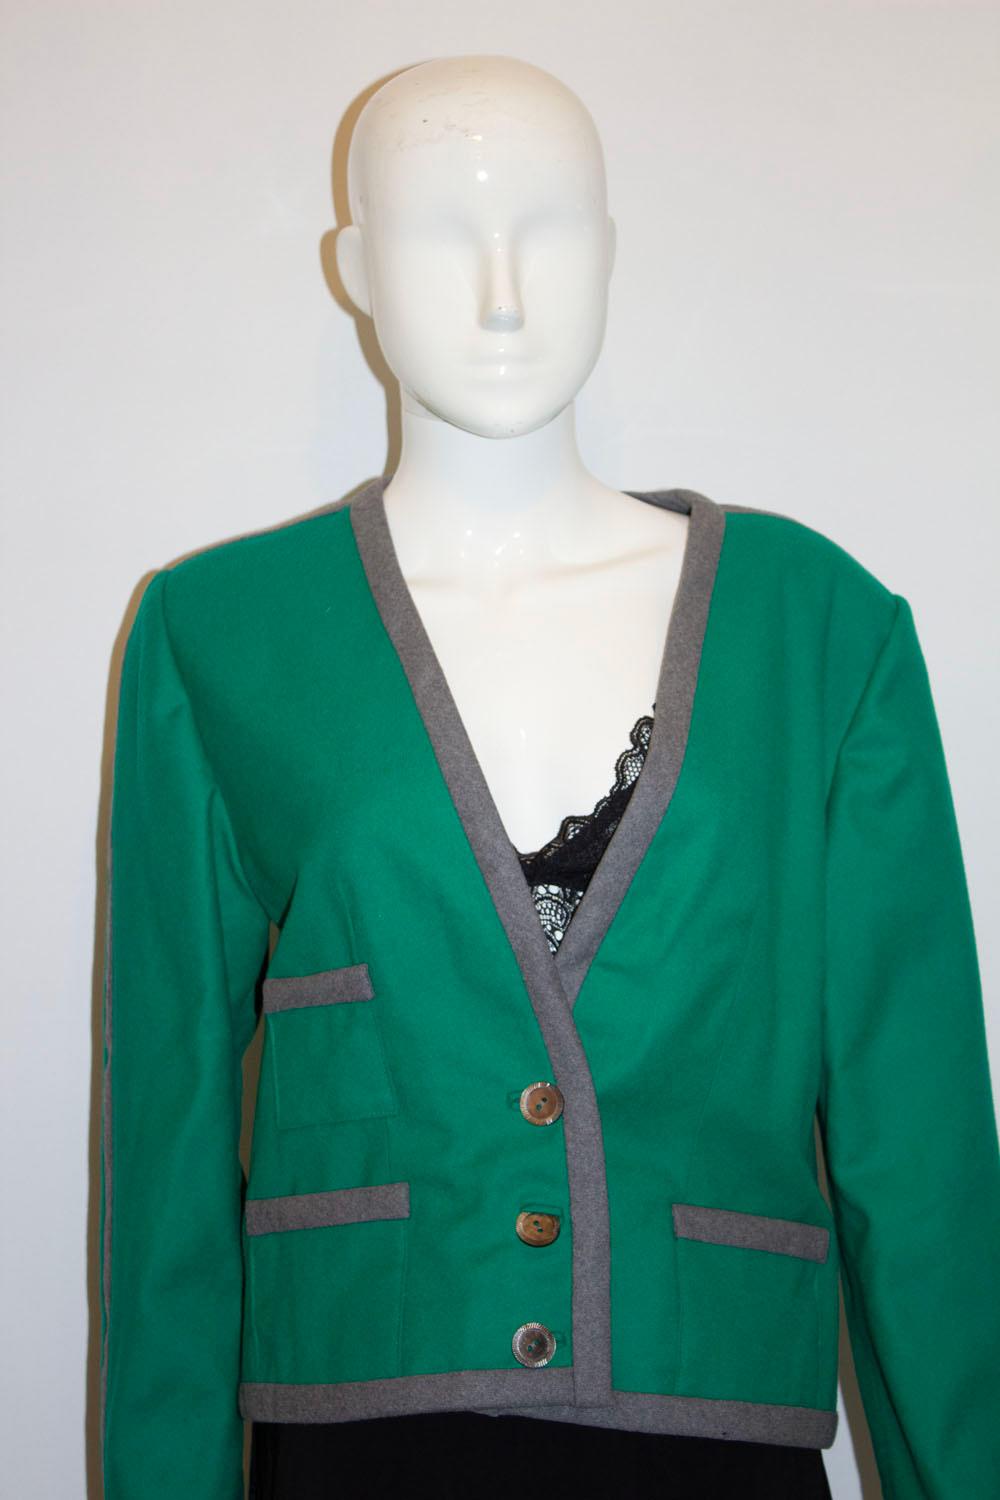 A wonderful vintage jacket by Vogue America, in a head turning colour combination of grey and green.
The jacket has a v neckline with three button fastening and three buttons on the front.  It is fully lined and has a colourful stripe along the side